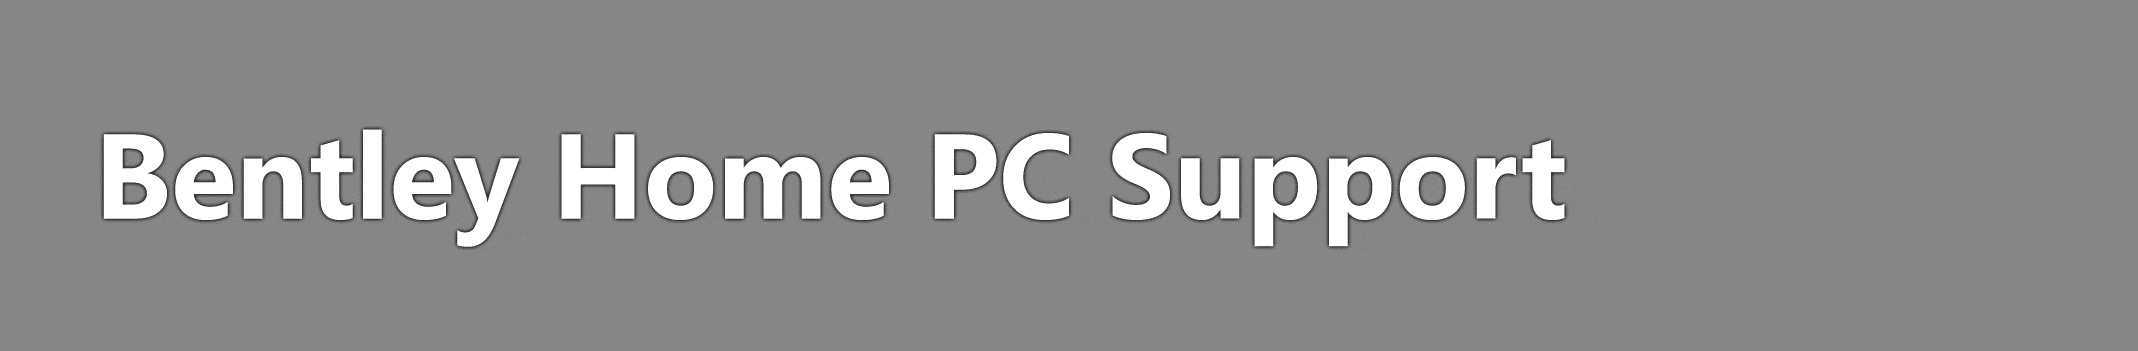 Bentley Home PC Support - Articles - The Email Issue